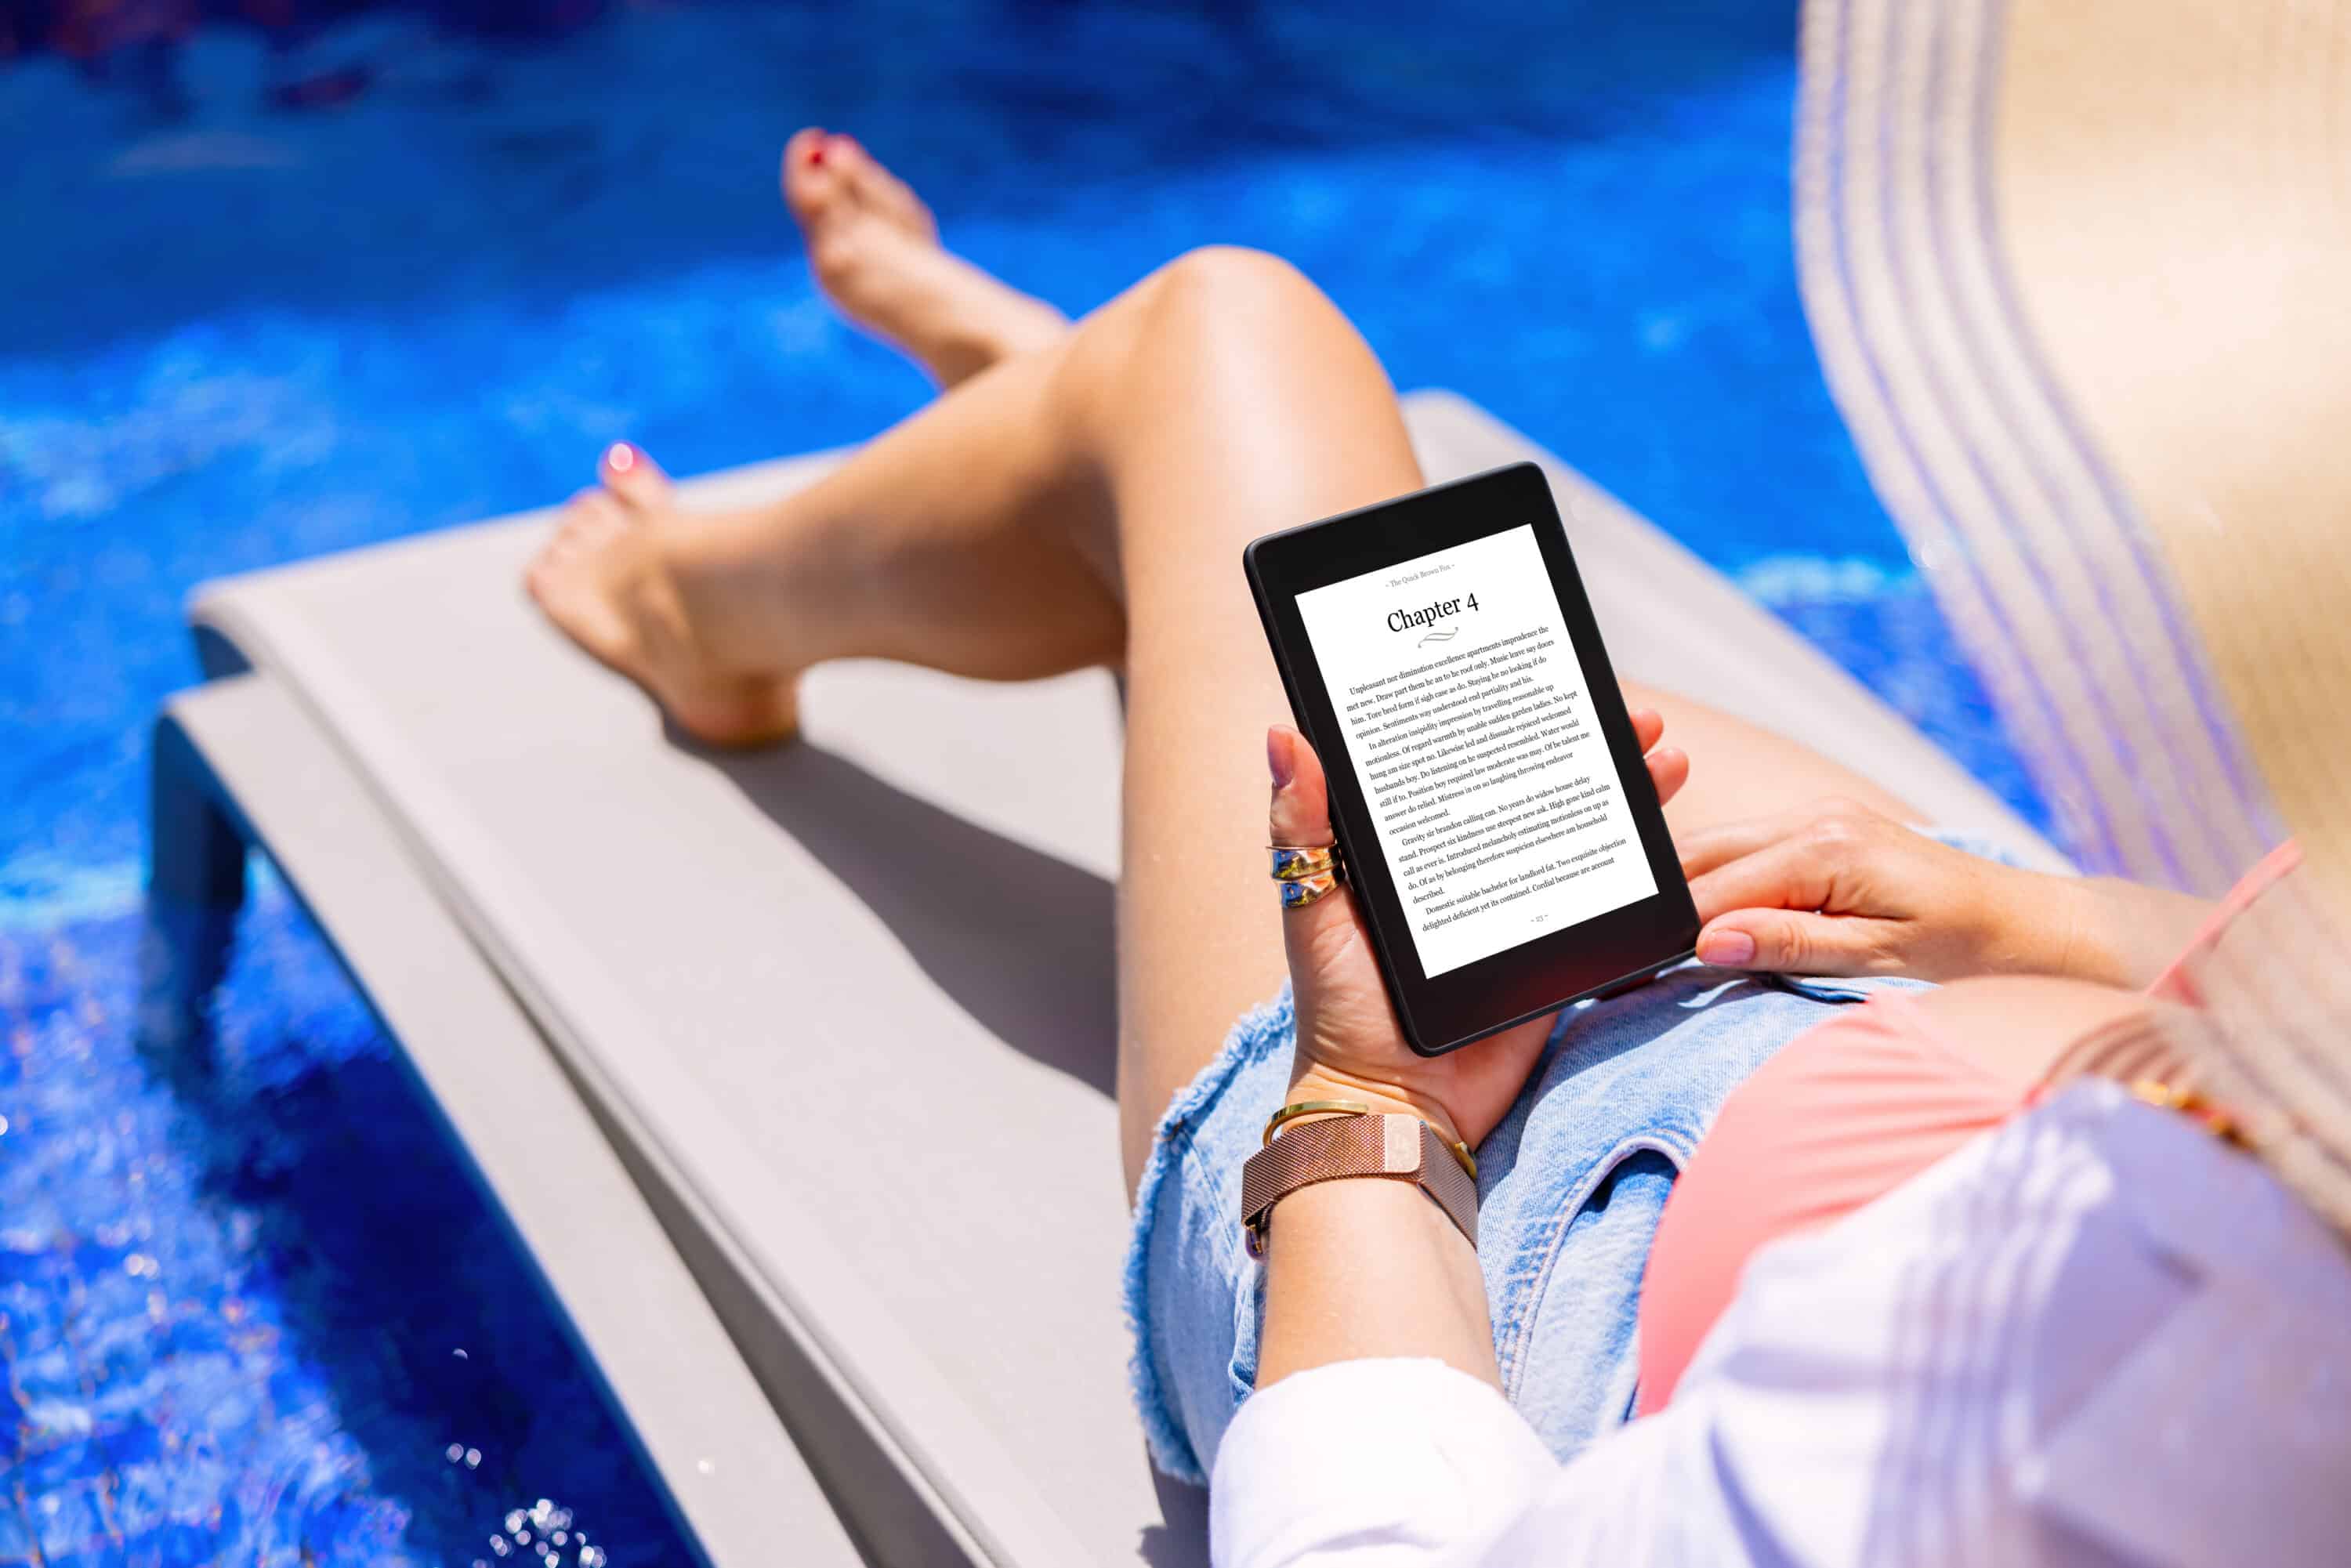 Woman lounging on a lounge chair in a pool reading a book on a Kindle.